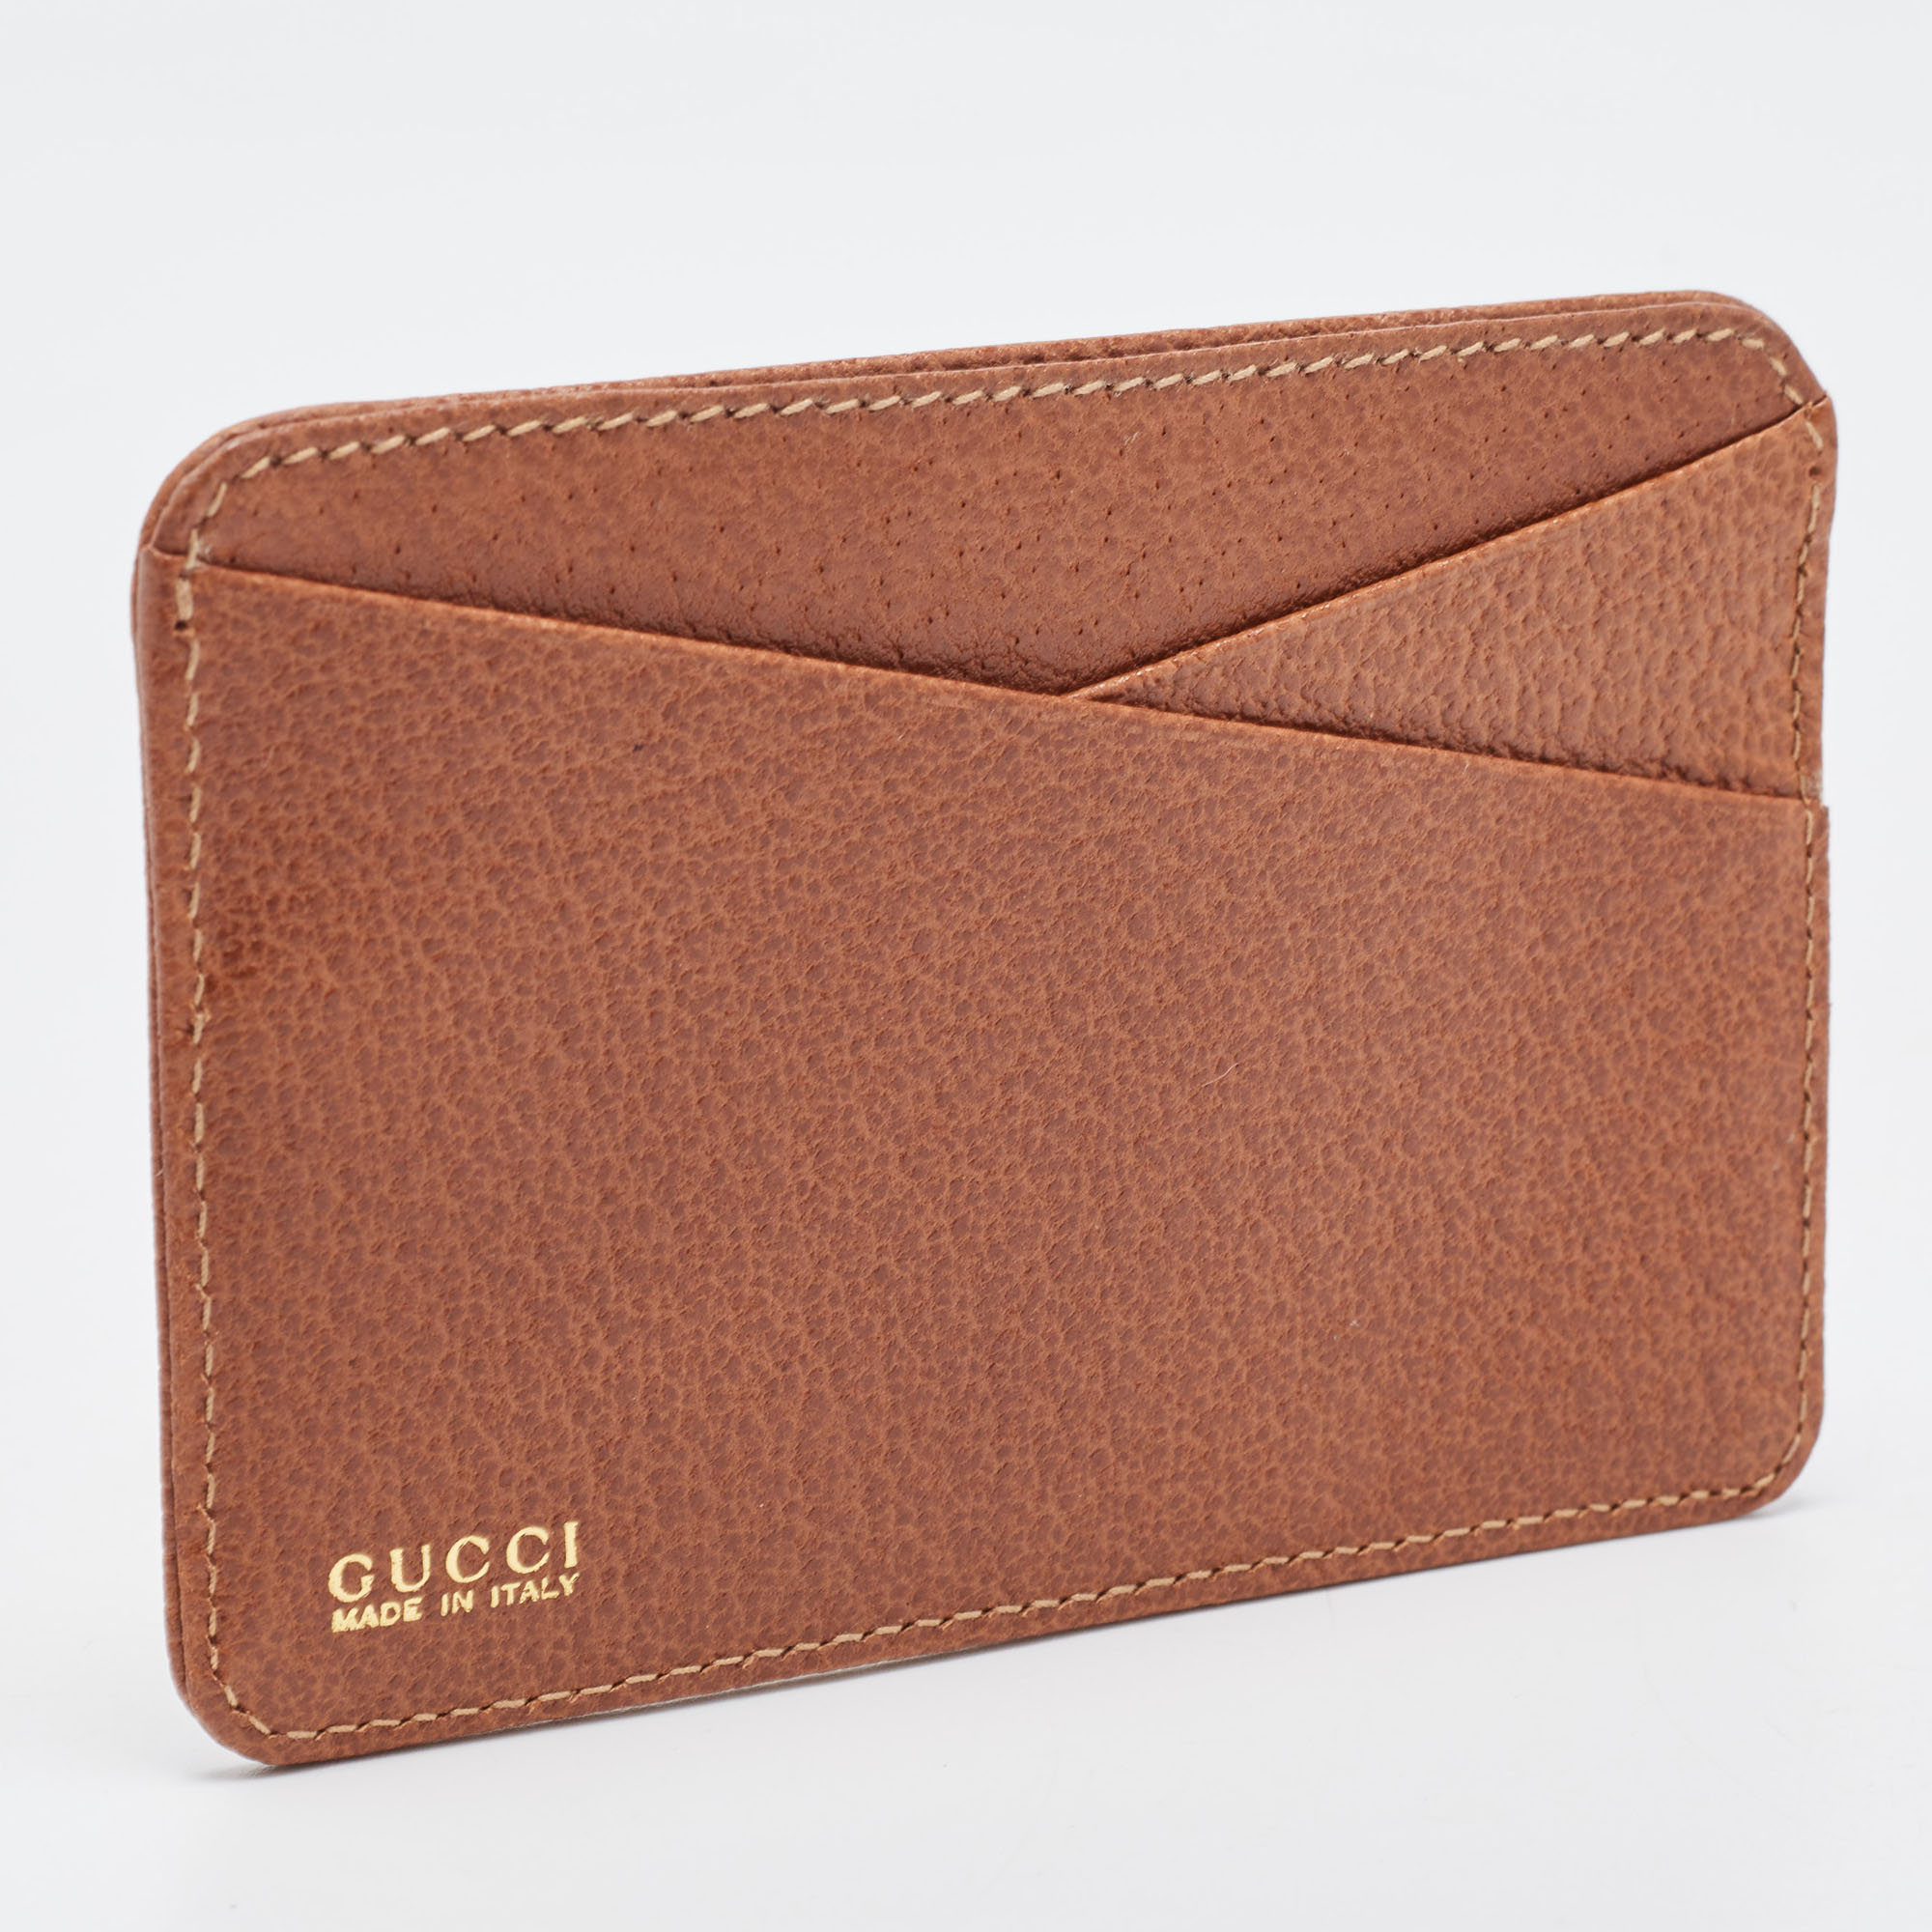 Gucci Brown Leather Card Holder